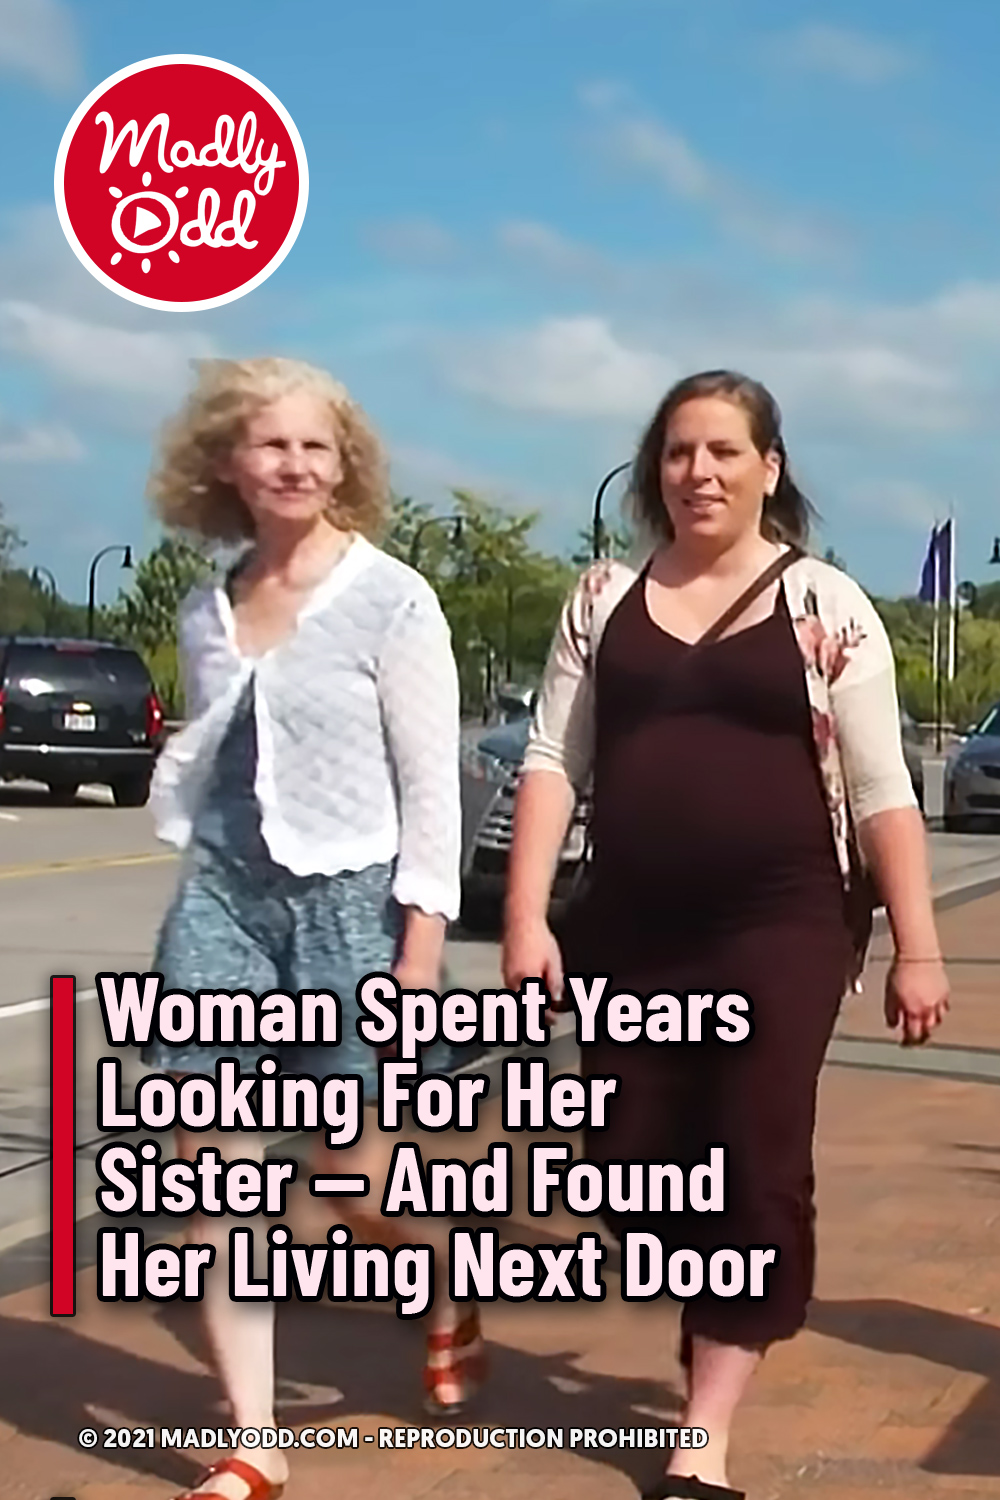 Woman Spent Years Looking For Her Sister — And Found Her Living Next Door